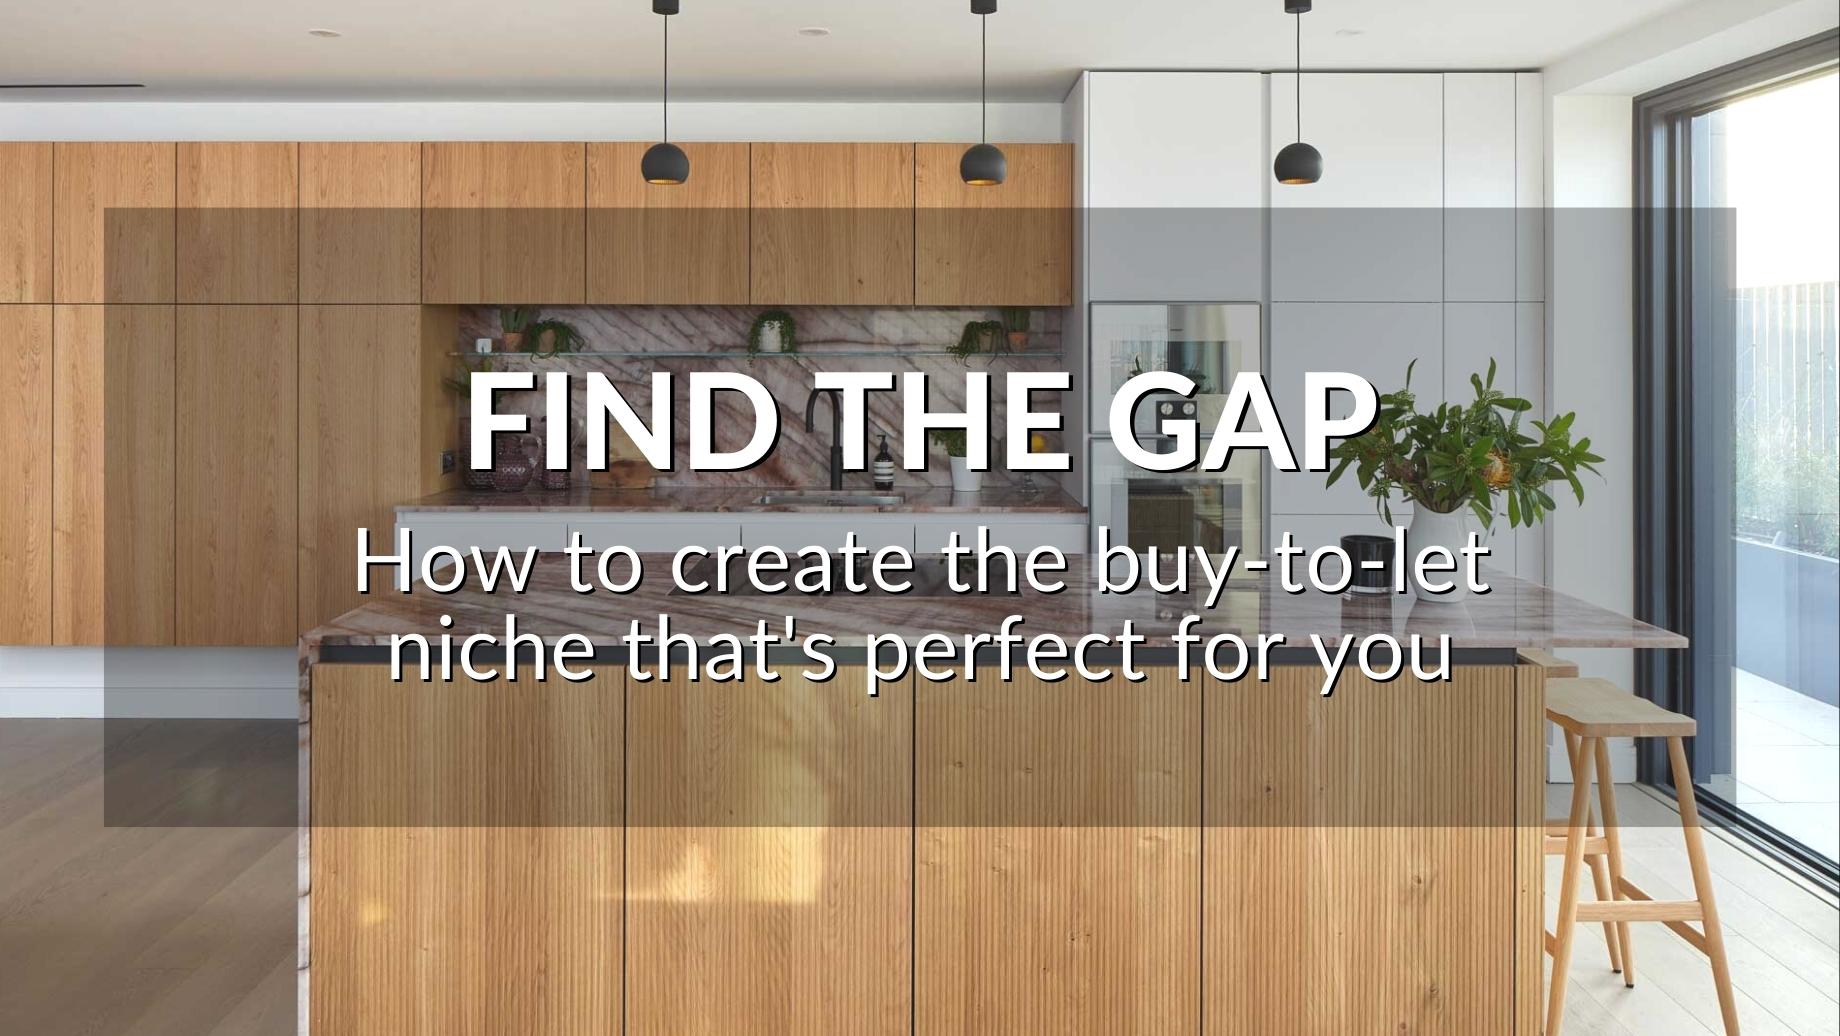 Find the gap: How to create the buy-to-let